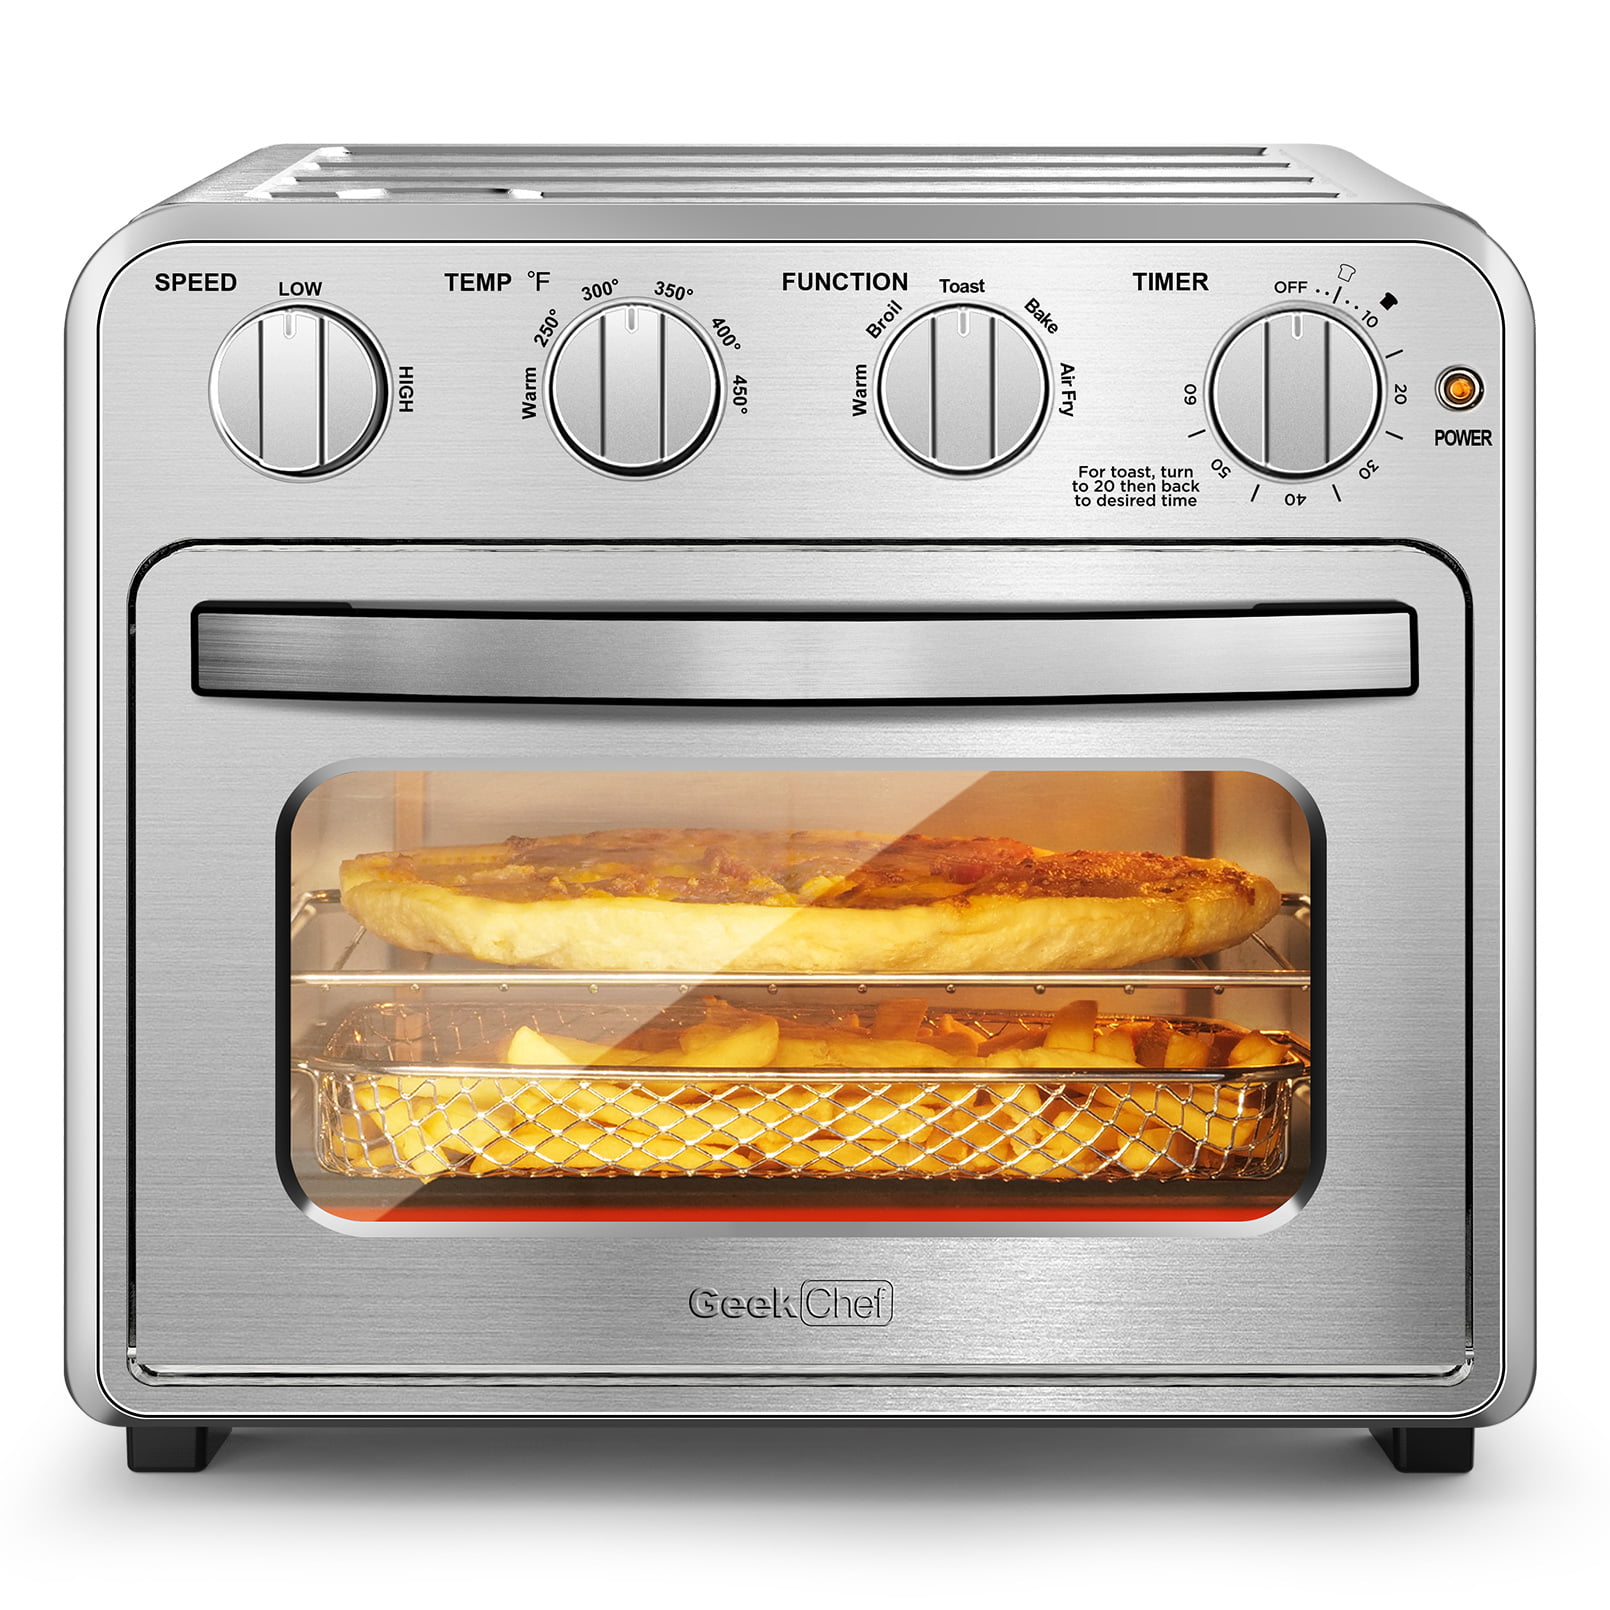  16QT Air Fryer Toaster Oven Combo 1800W, Unichefry Countertop  Convection Oven Including Toaster, Broil, Air Fry,Timer/Auto Shutoff,  150°-450°F Temp Controls, 15L Capacity, Fit 9 Slices or 12 Pizza : Home 